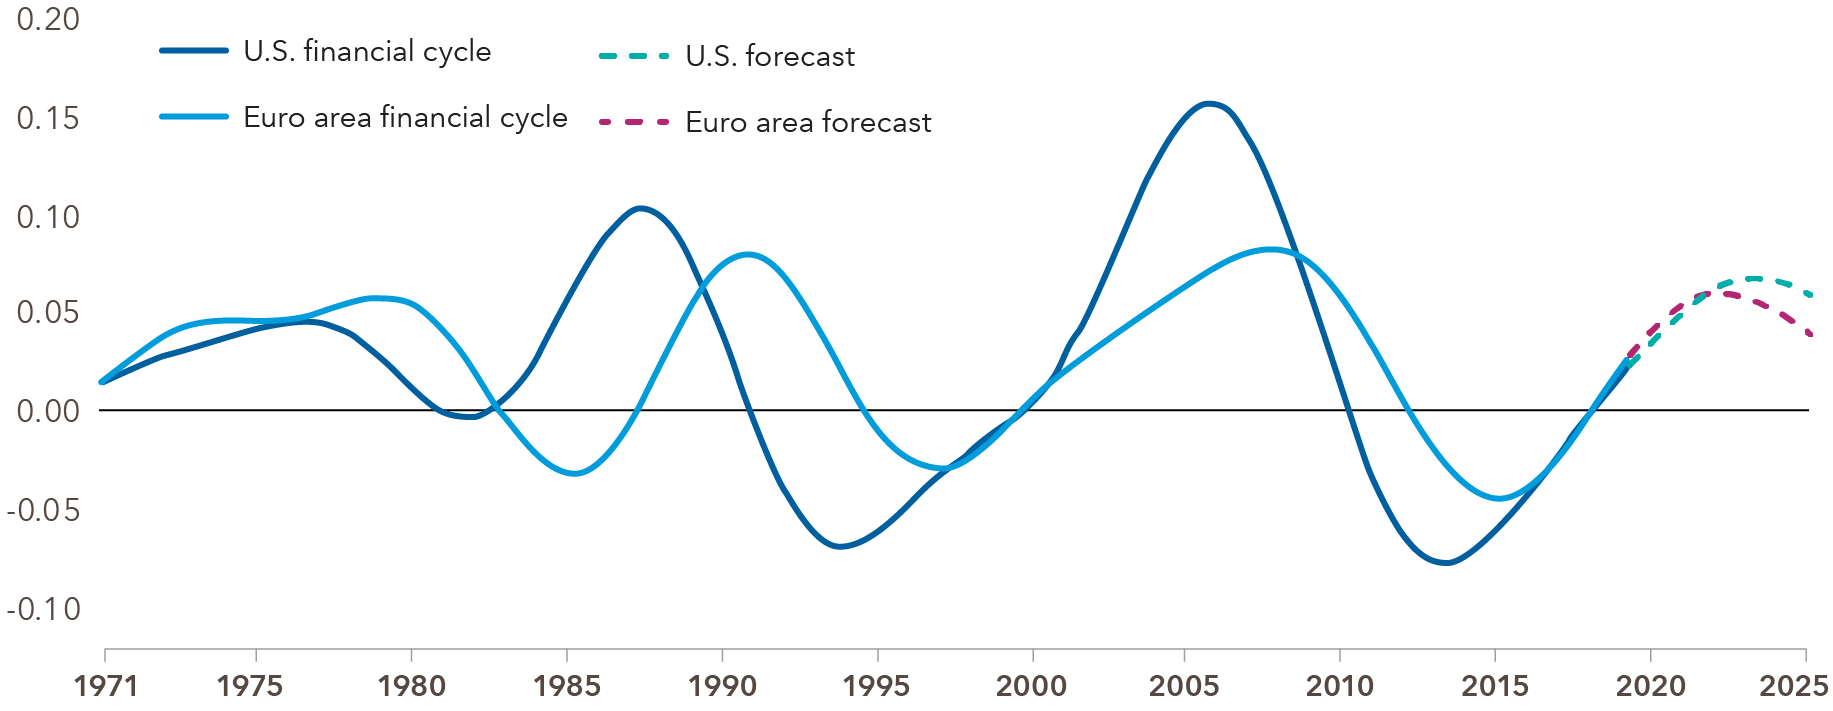 Line chart compares the U.S. and euro area financial cycles from 1971 through the second quarter of 2025. Both cycles are currently rising. The chart shows that the U.S. cycle is forecast to peak around mid-2023, and the euro area cycle is forecast to peak around mid-2022. Forecast based on the most recent global forecast from the National Institute of Economic and Social Research. 